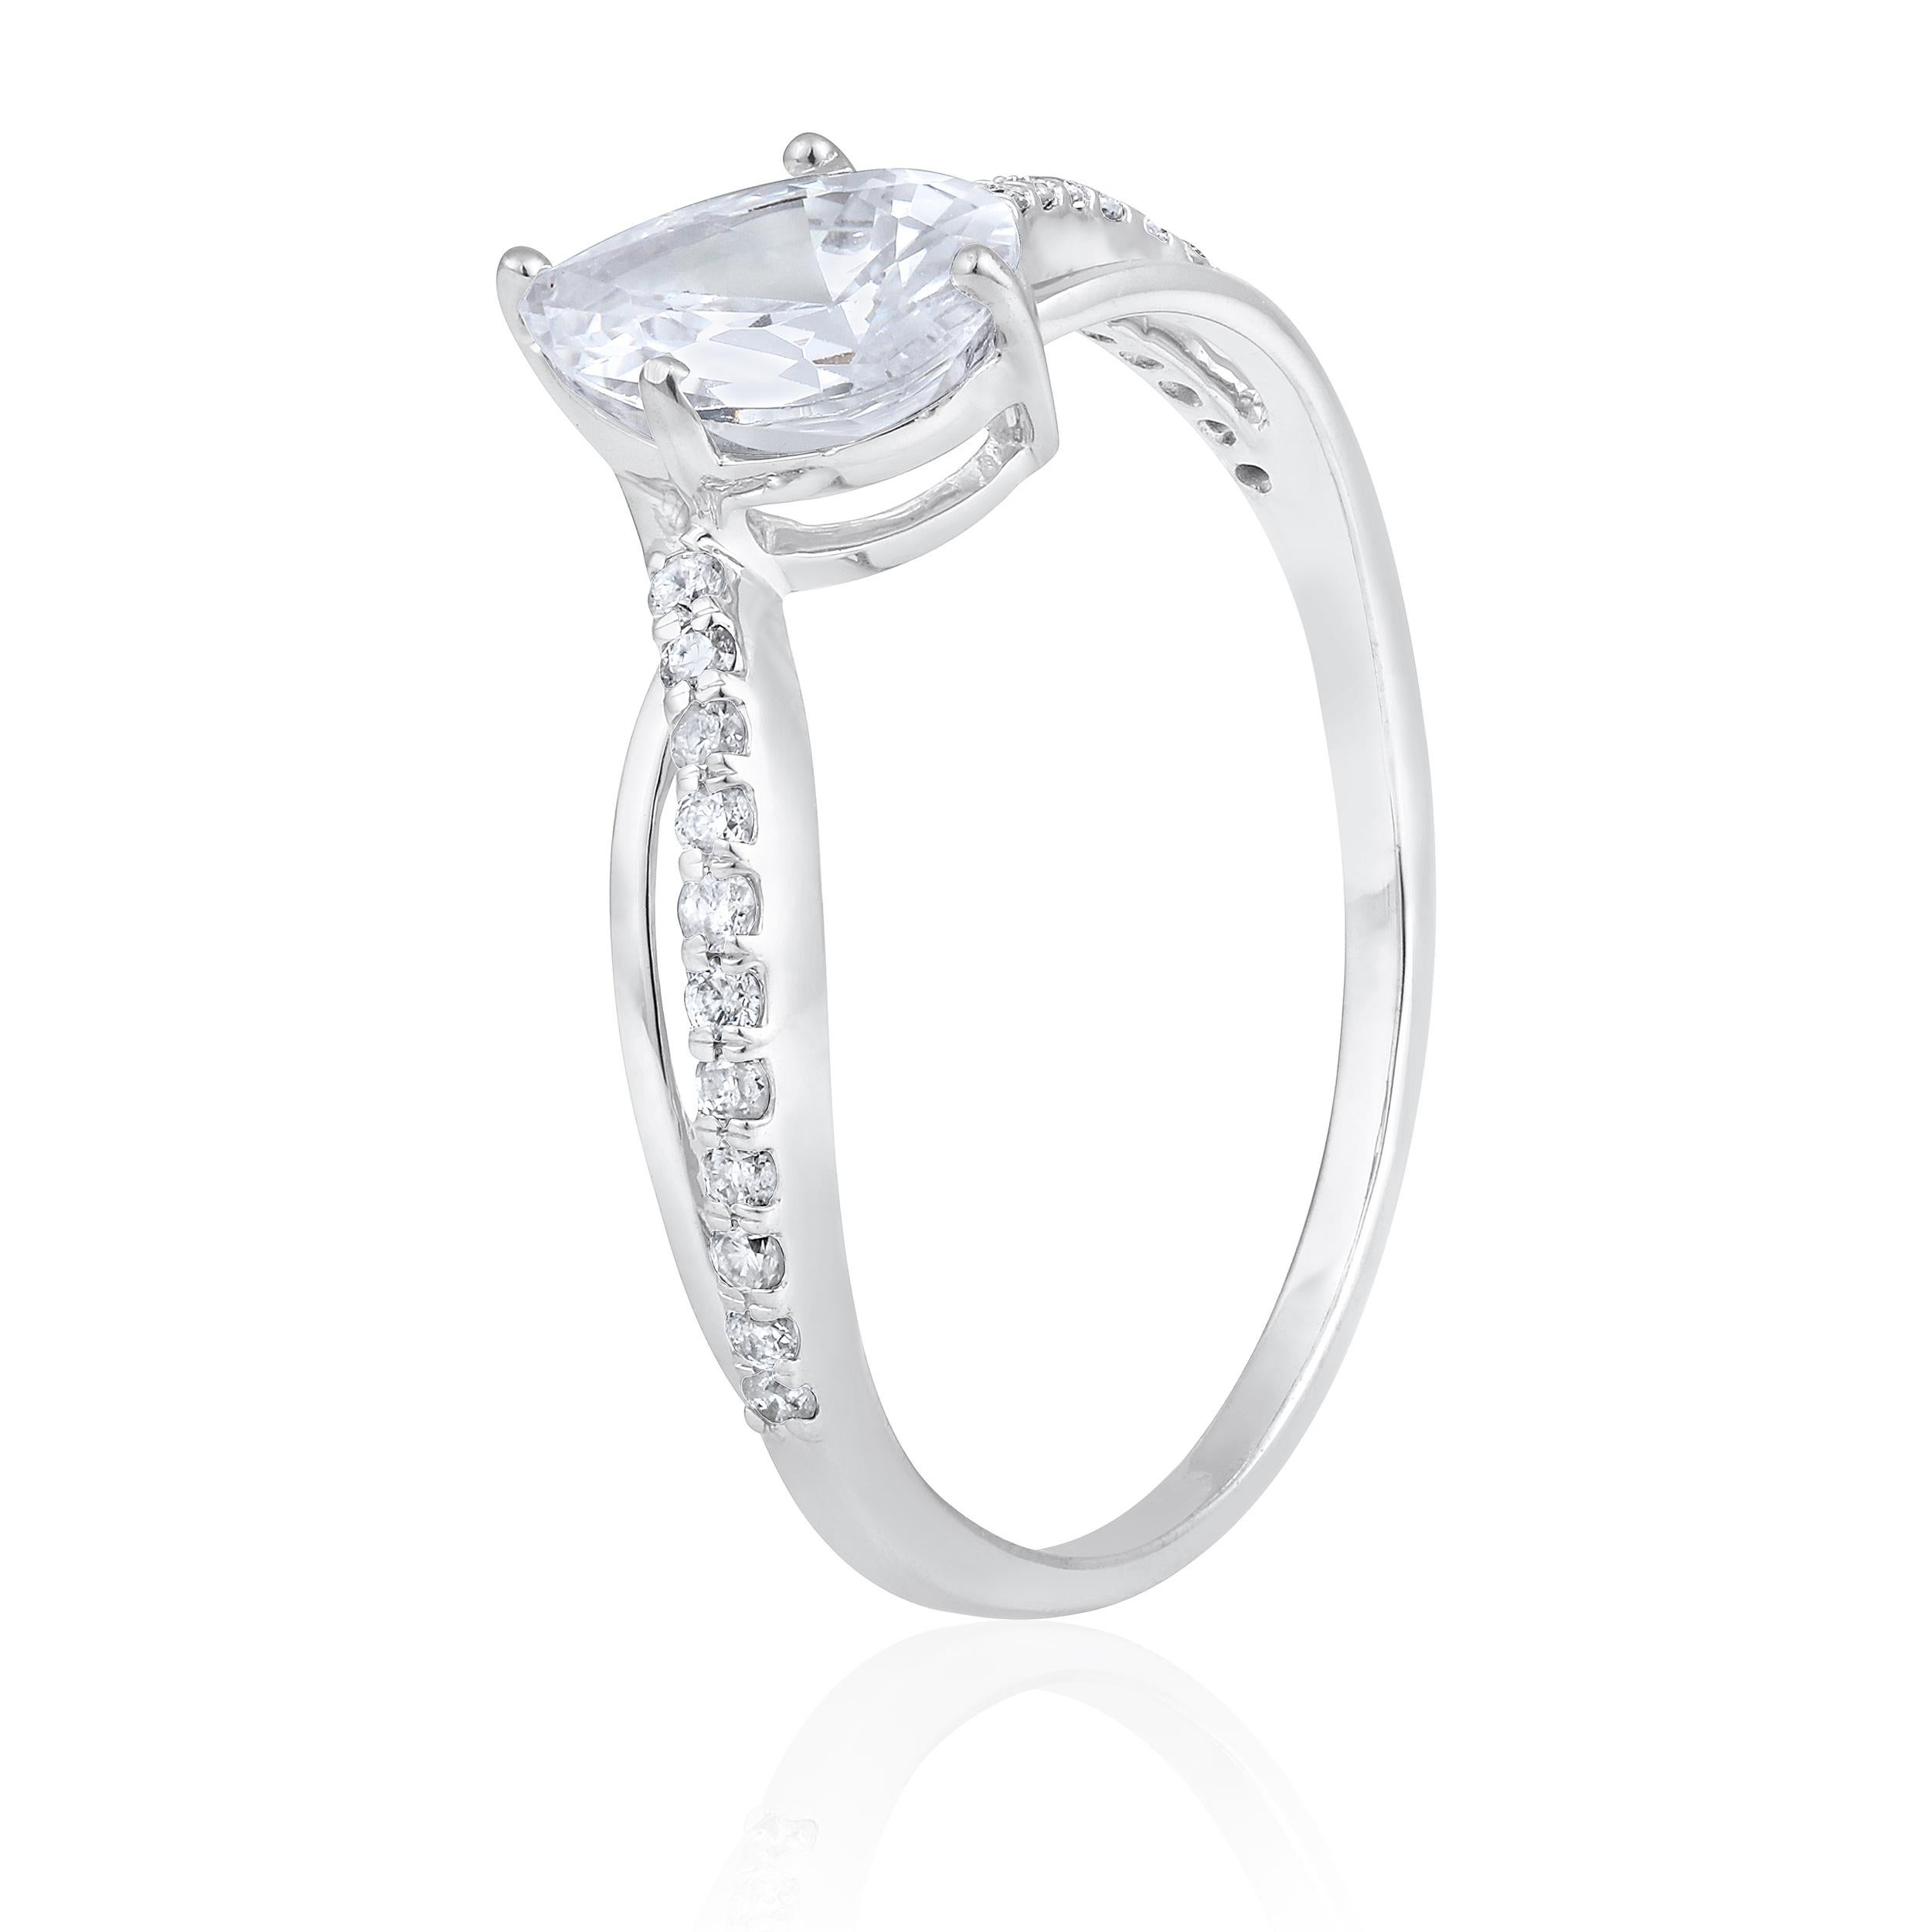 Ring Size: US 7 

Crafted in 1.72 grams of 10K White Gold, the ring contains 22 stones of Round Diamonds with a total of 0.155 carat in F-G color and I1-I2 clarity combined with 1 stone of Cubic Zirconia with a total of 1.35 carat.

CONTEMPORARY AND